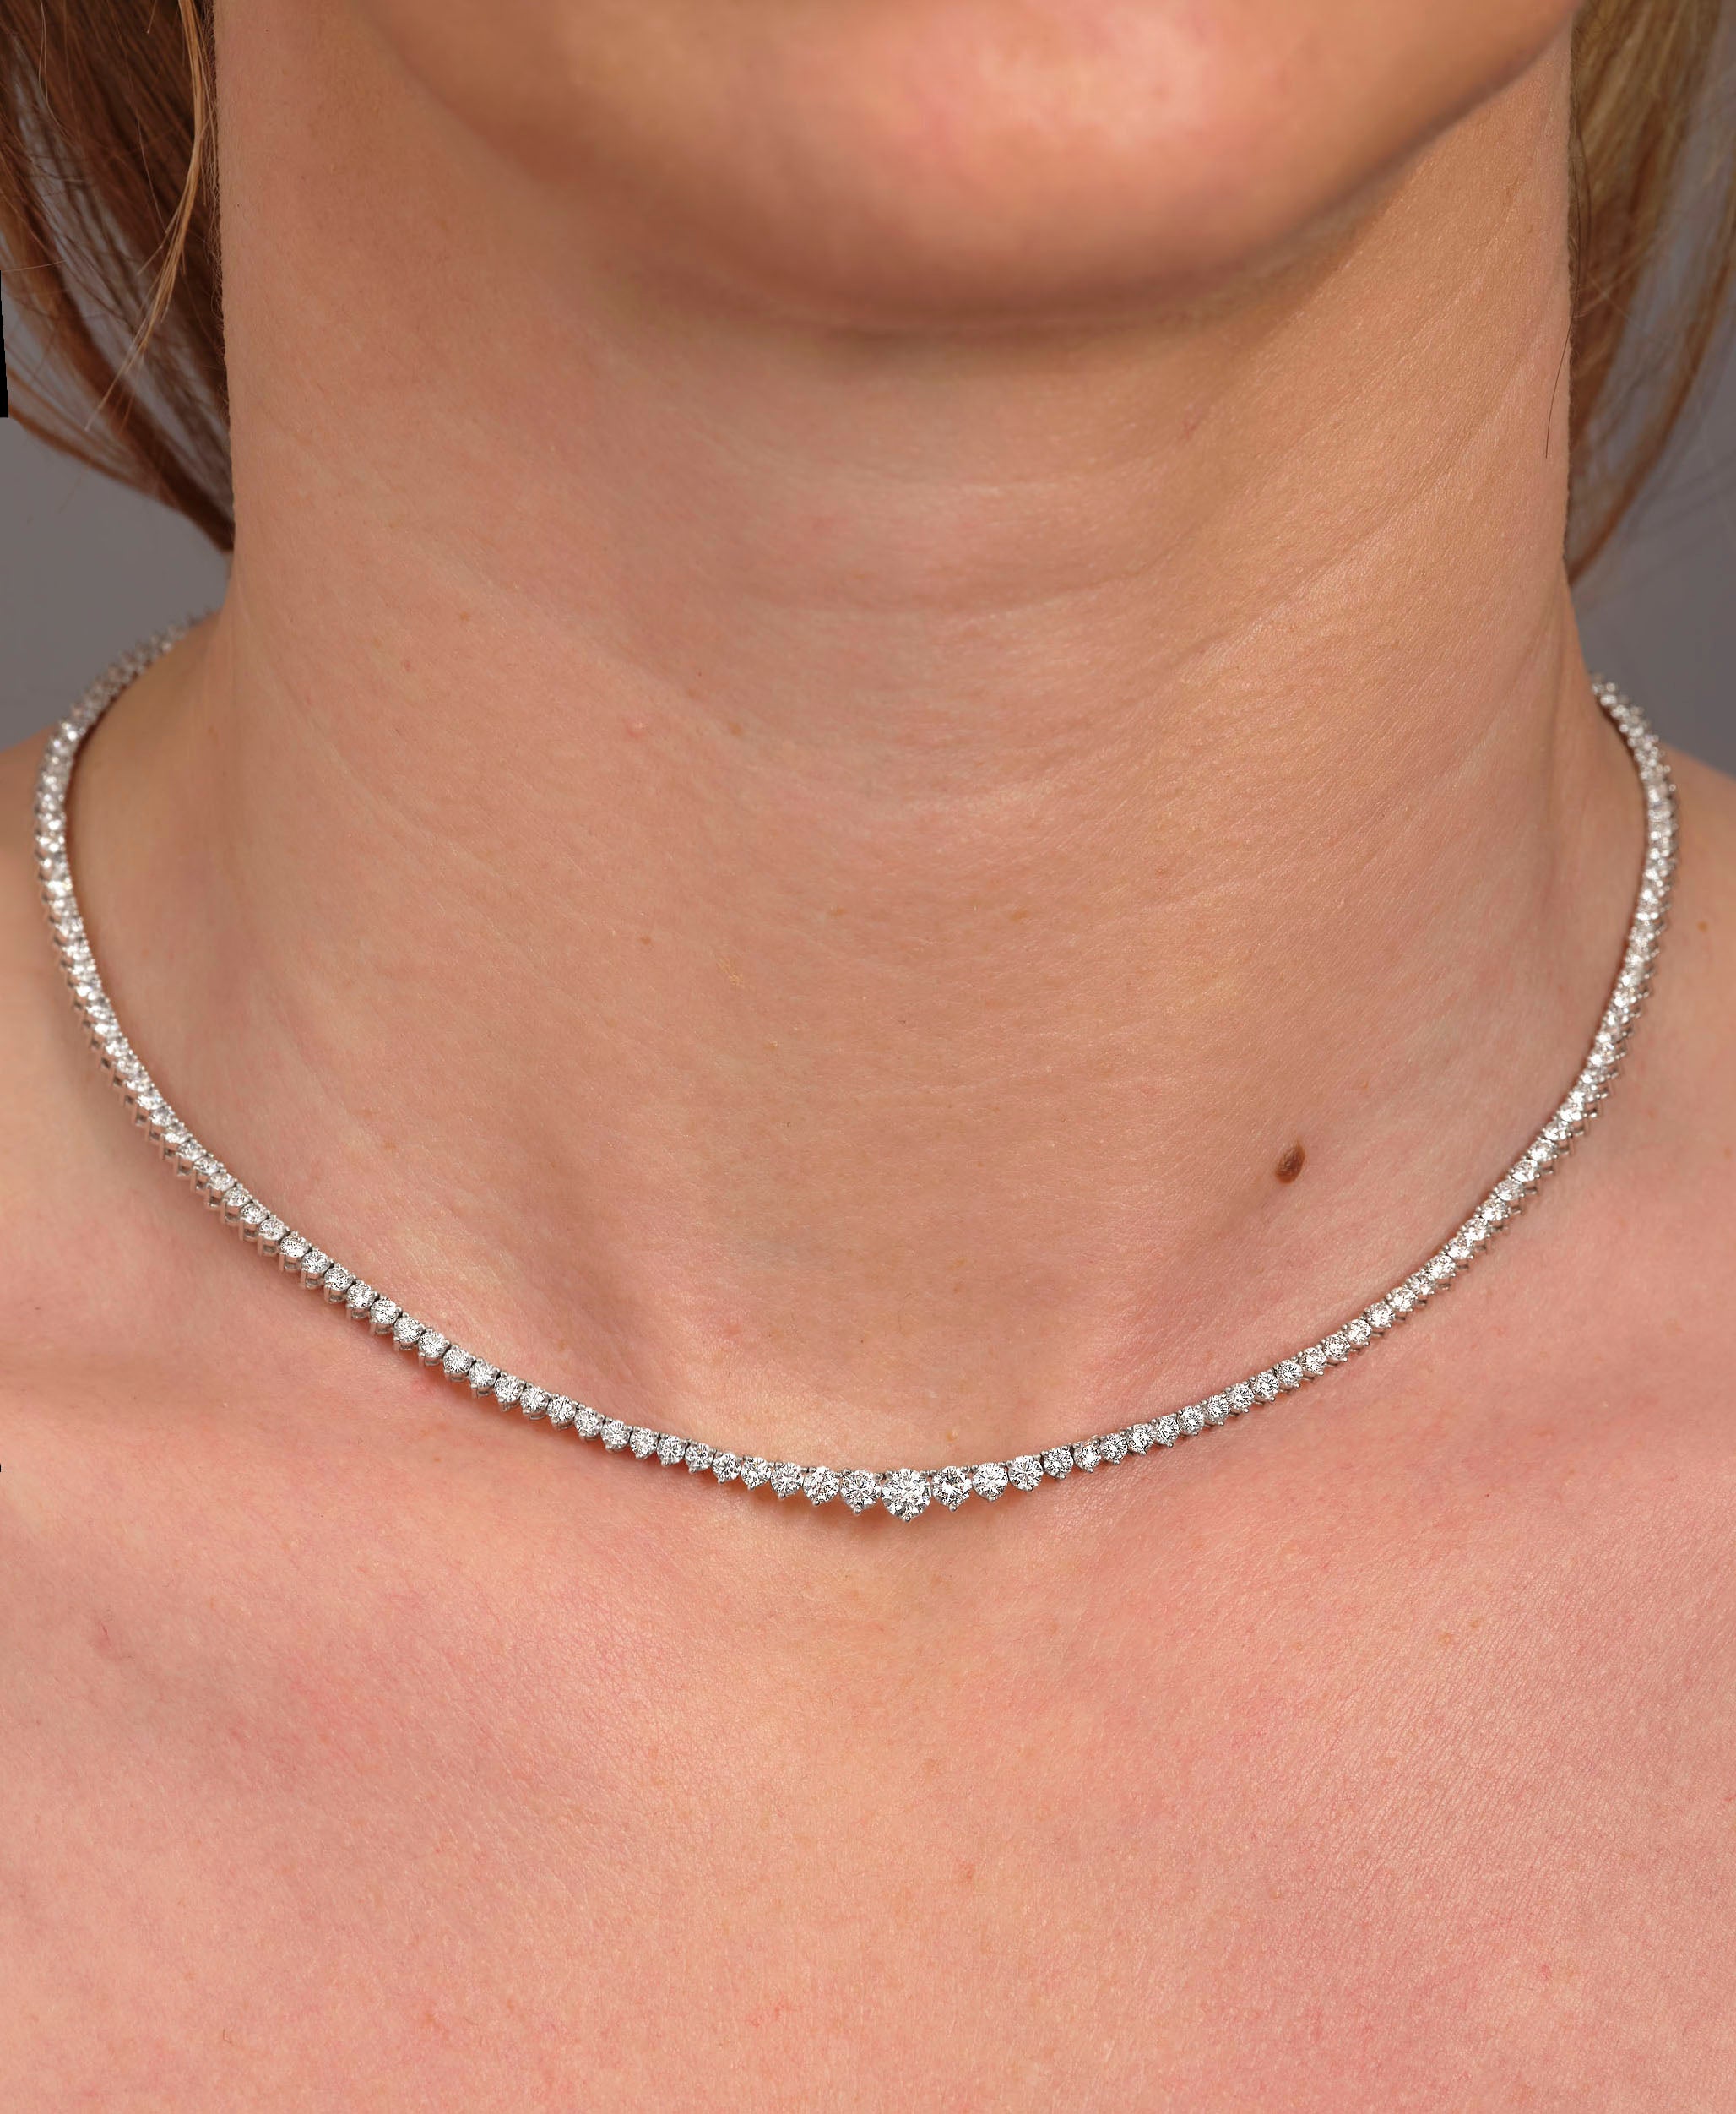 8ct Graduated Necklace